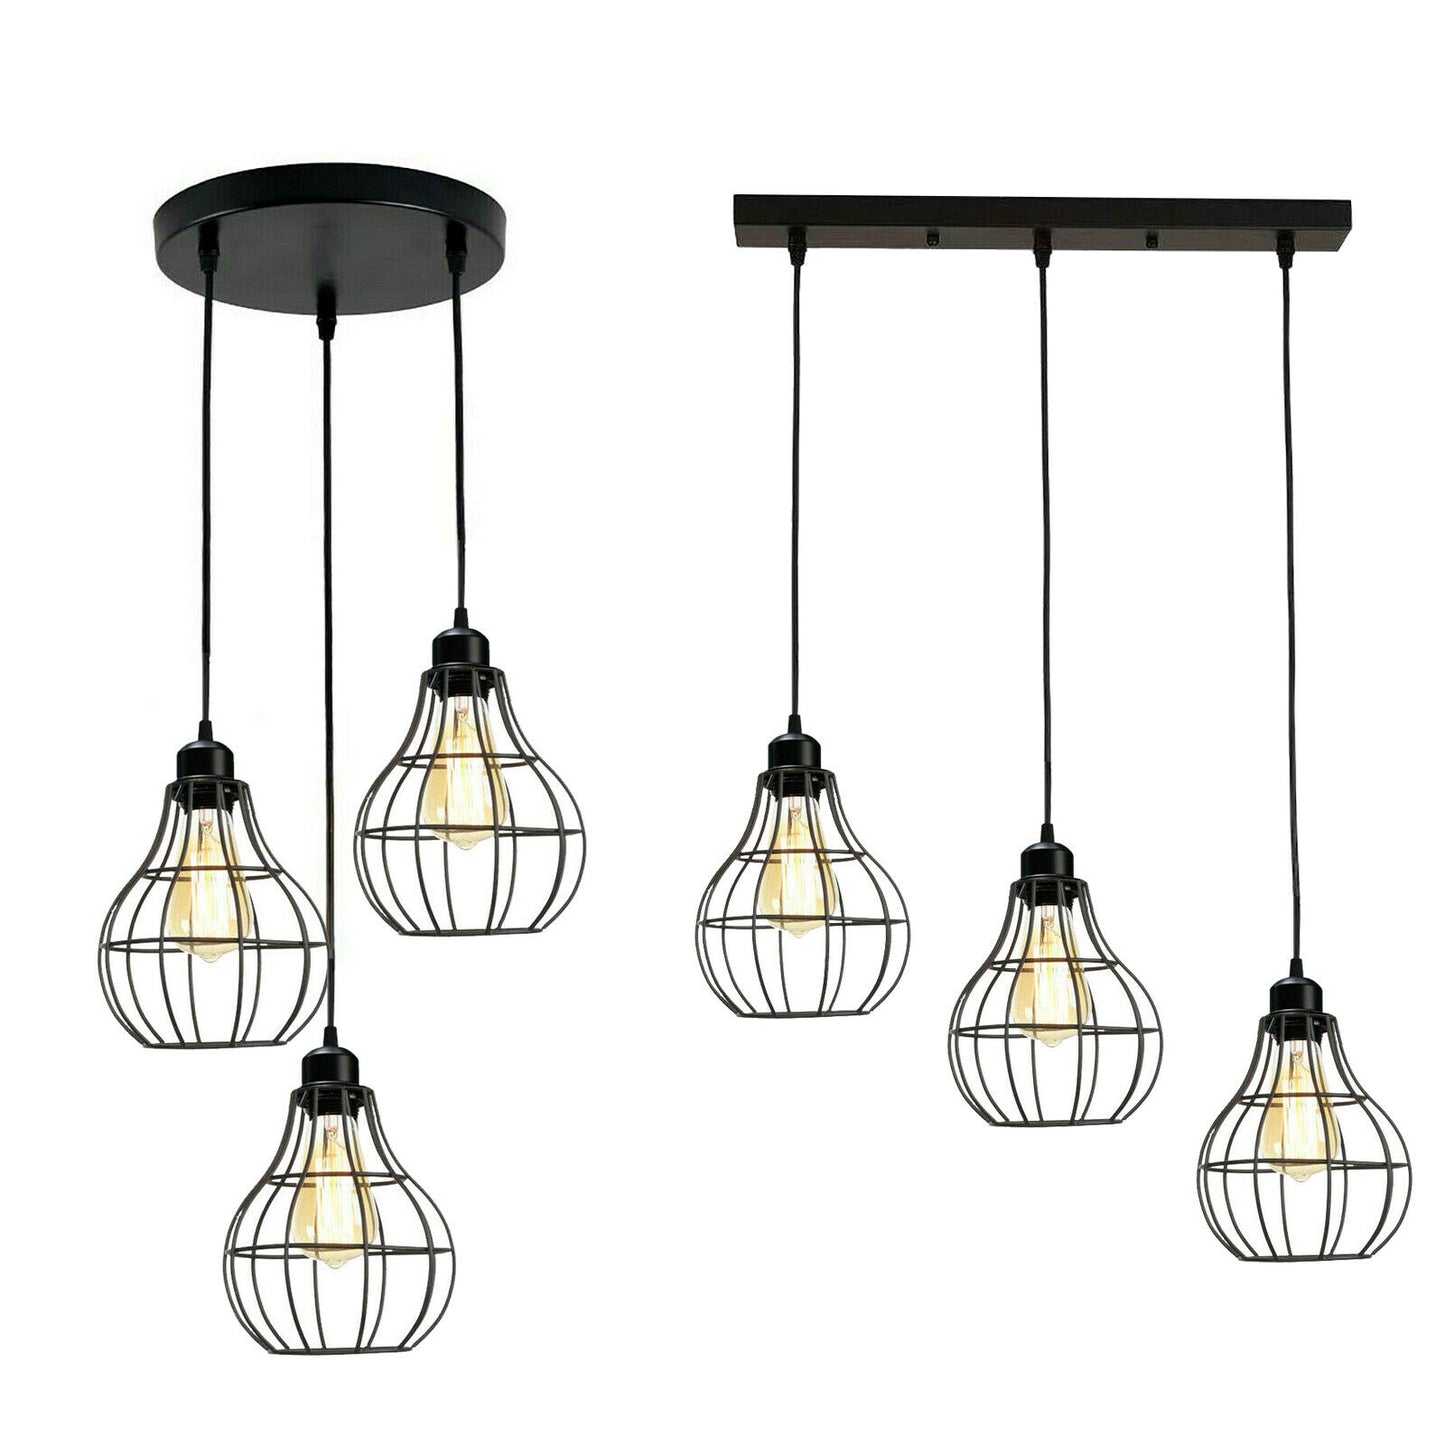 Modern 3 Way Black Wire Cage Industrial Pendant Light Fixture